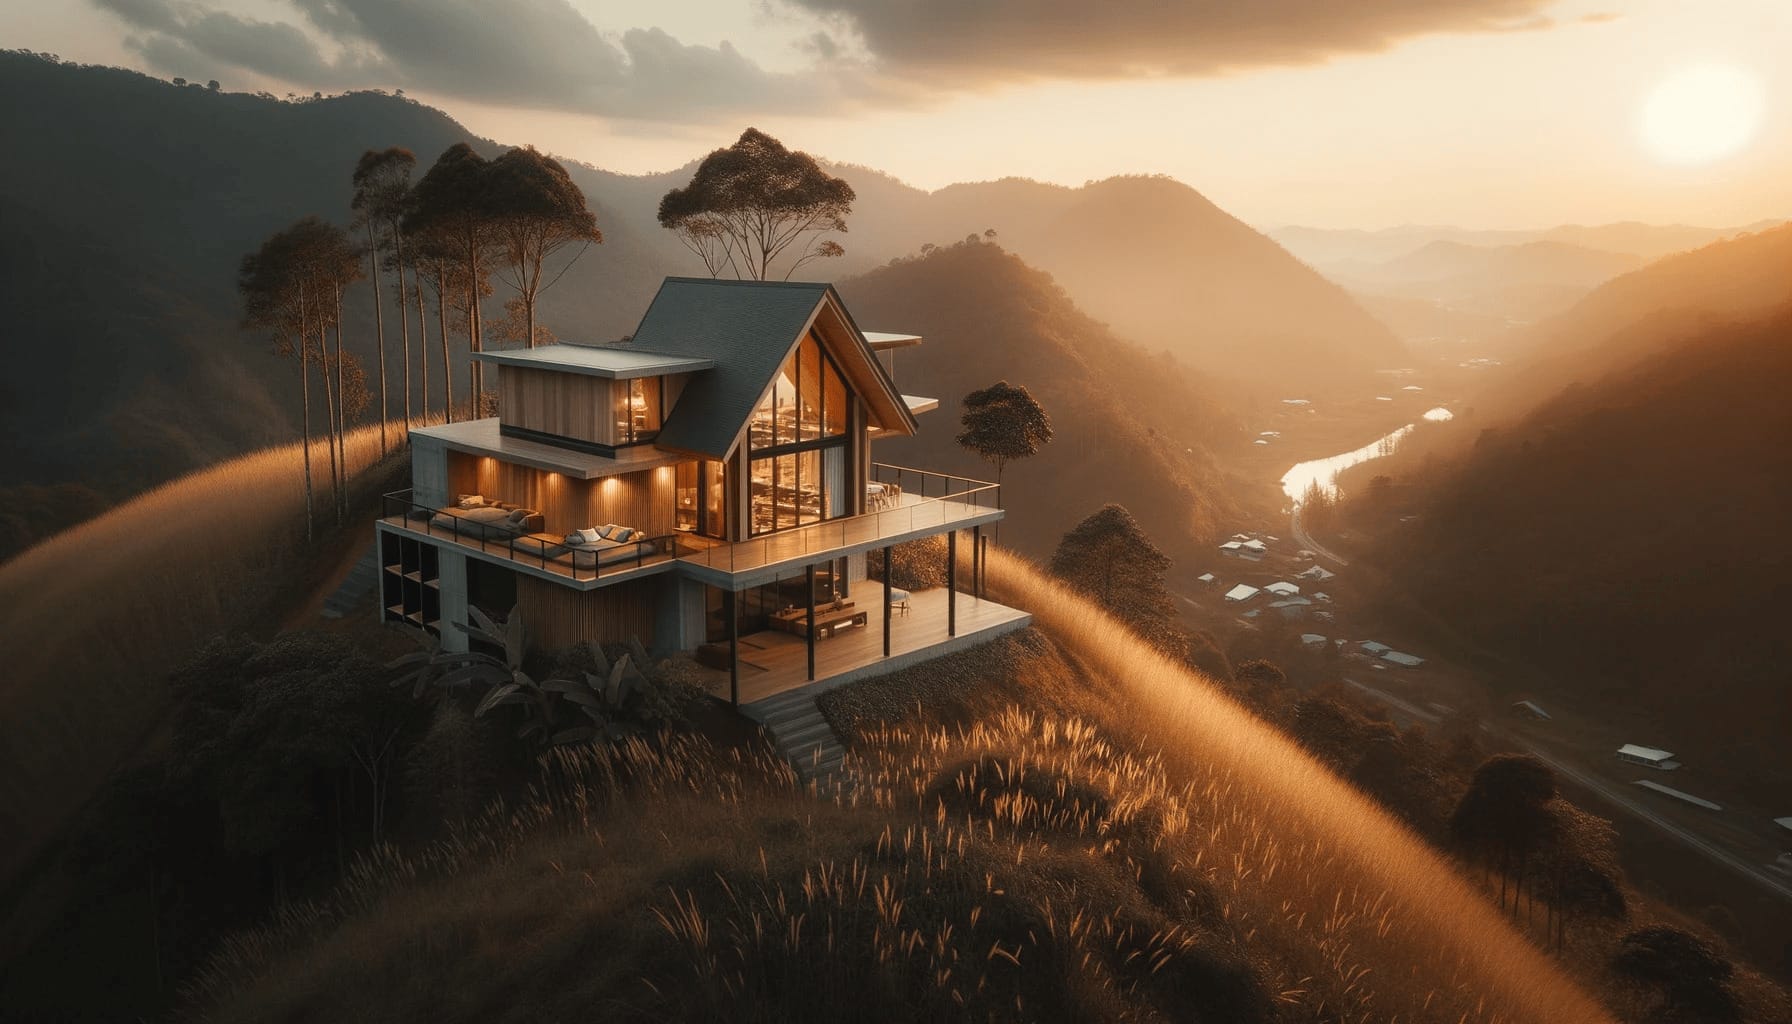 DALL·E 2023 10 19 09.12.17 Photo of a modern cabin house on a hilltop overlooking a valley. The cabin is illuminated by the golden hour light highlighting its architectural be